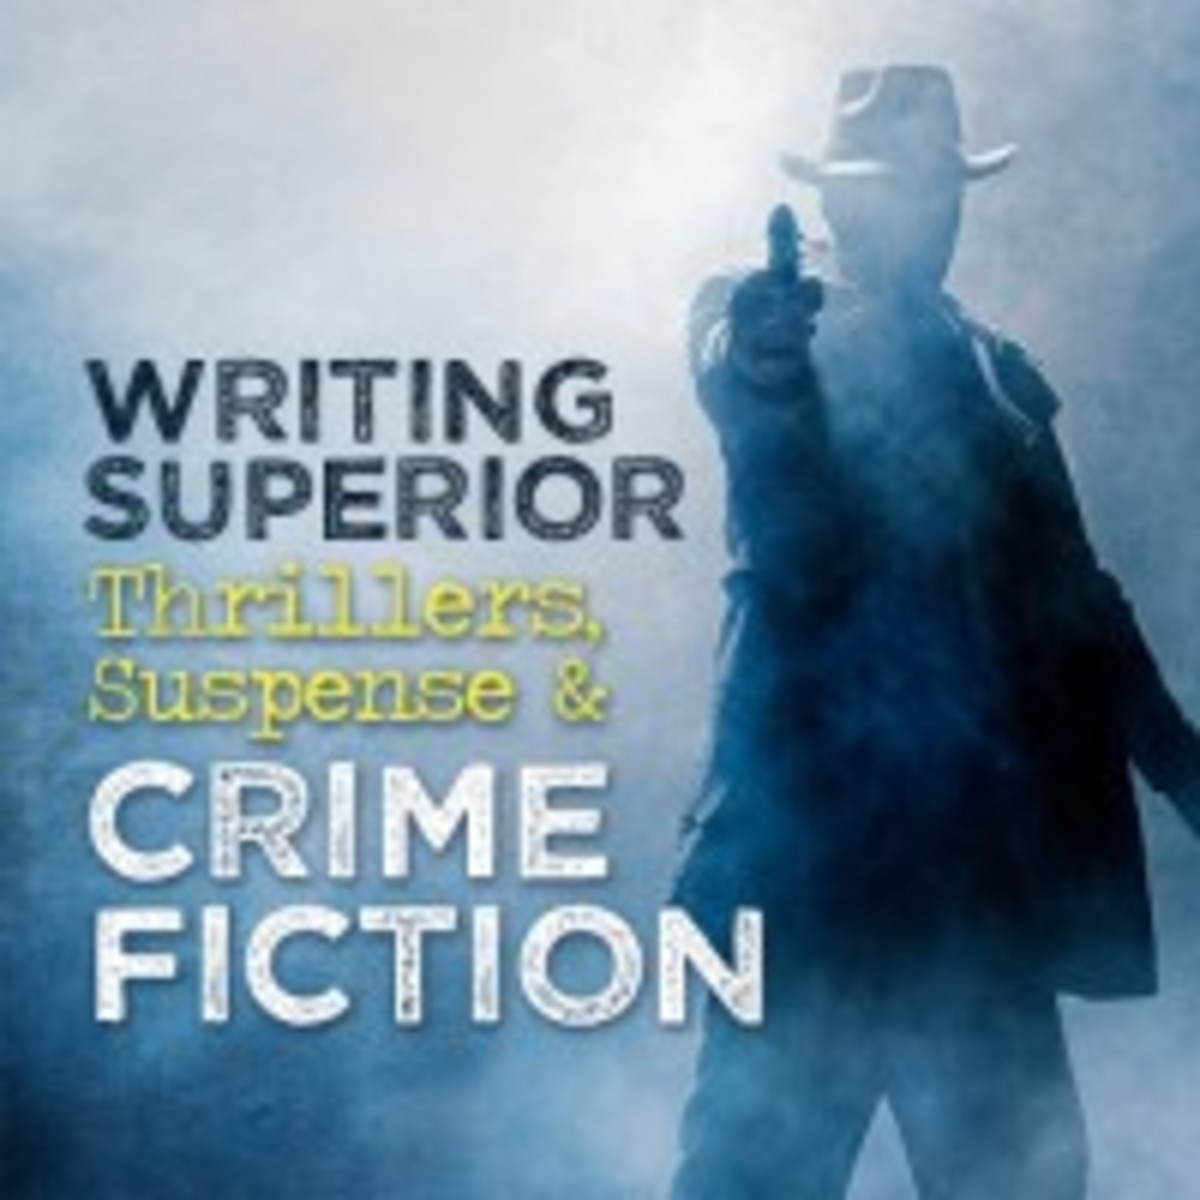  10 Resources for Writing Superior Thrillers, Suspense and Crime Fiction